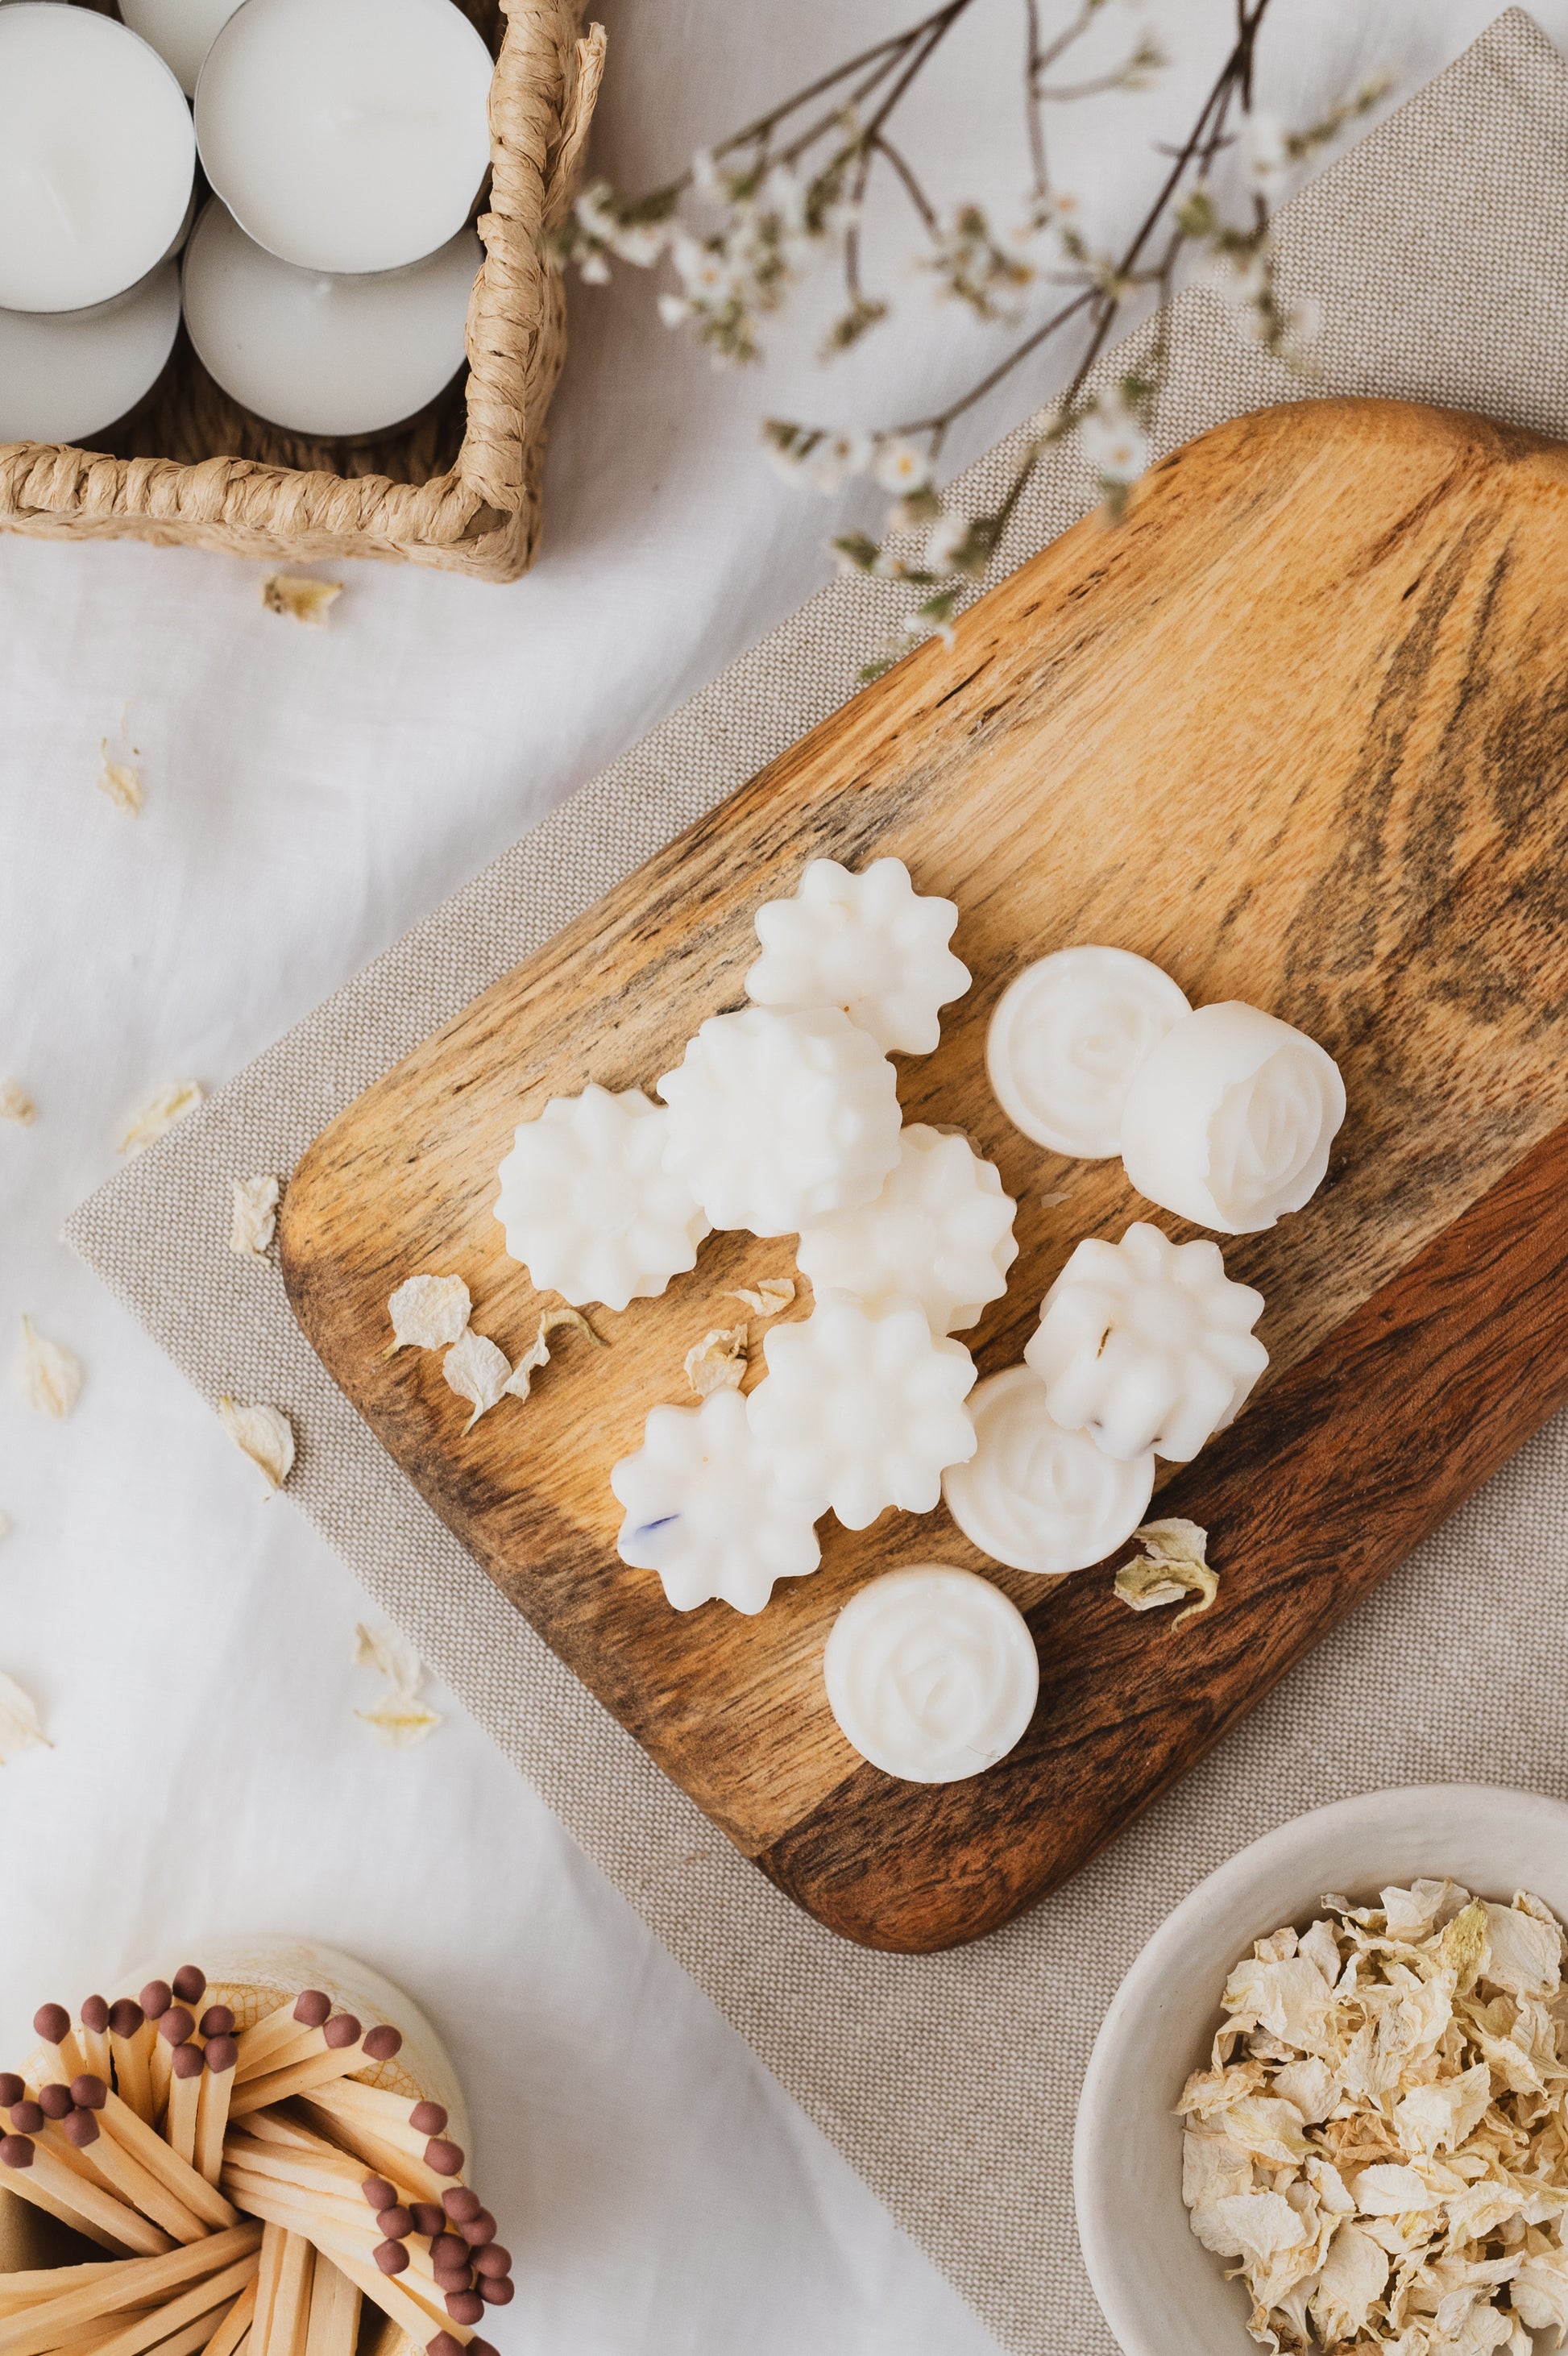 Our Apple Blossom botanical soy wax melts laid-out onto a chopping board.